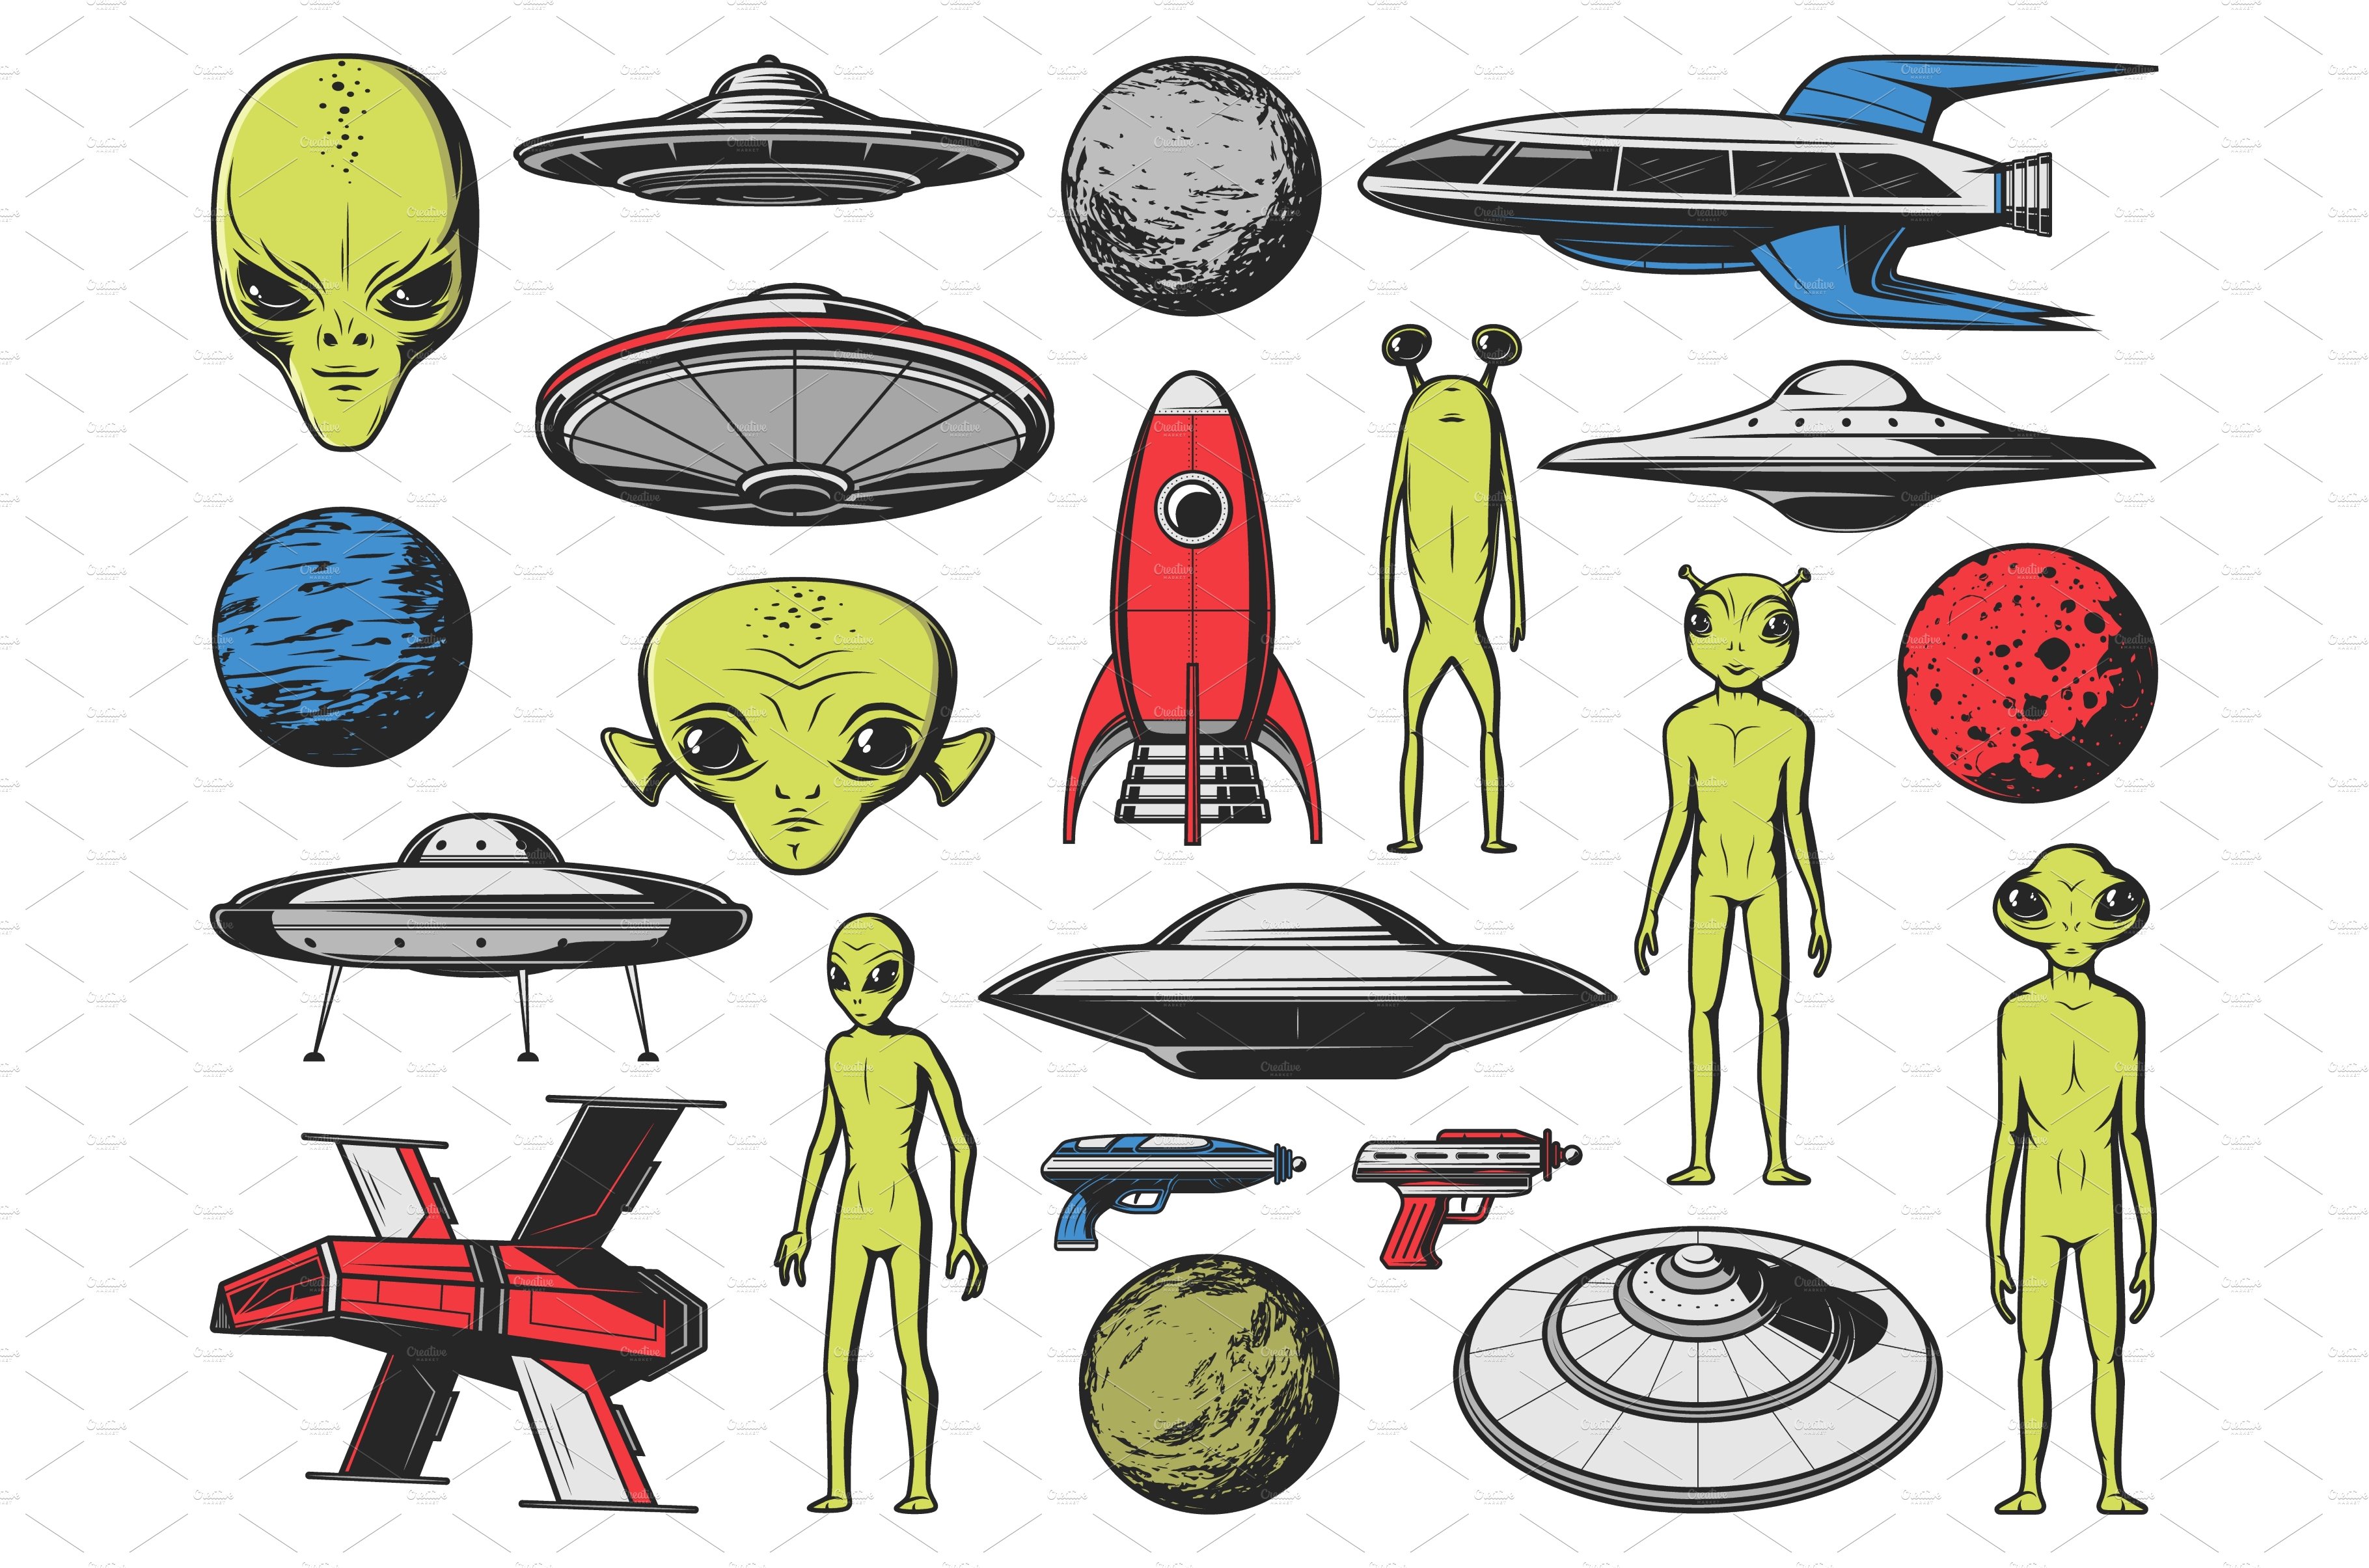 Aliens, fictional UFO spaceships cover image.